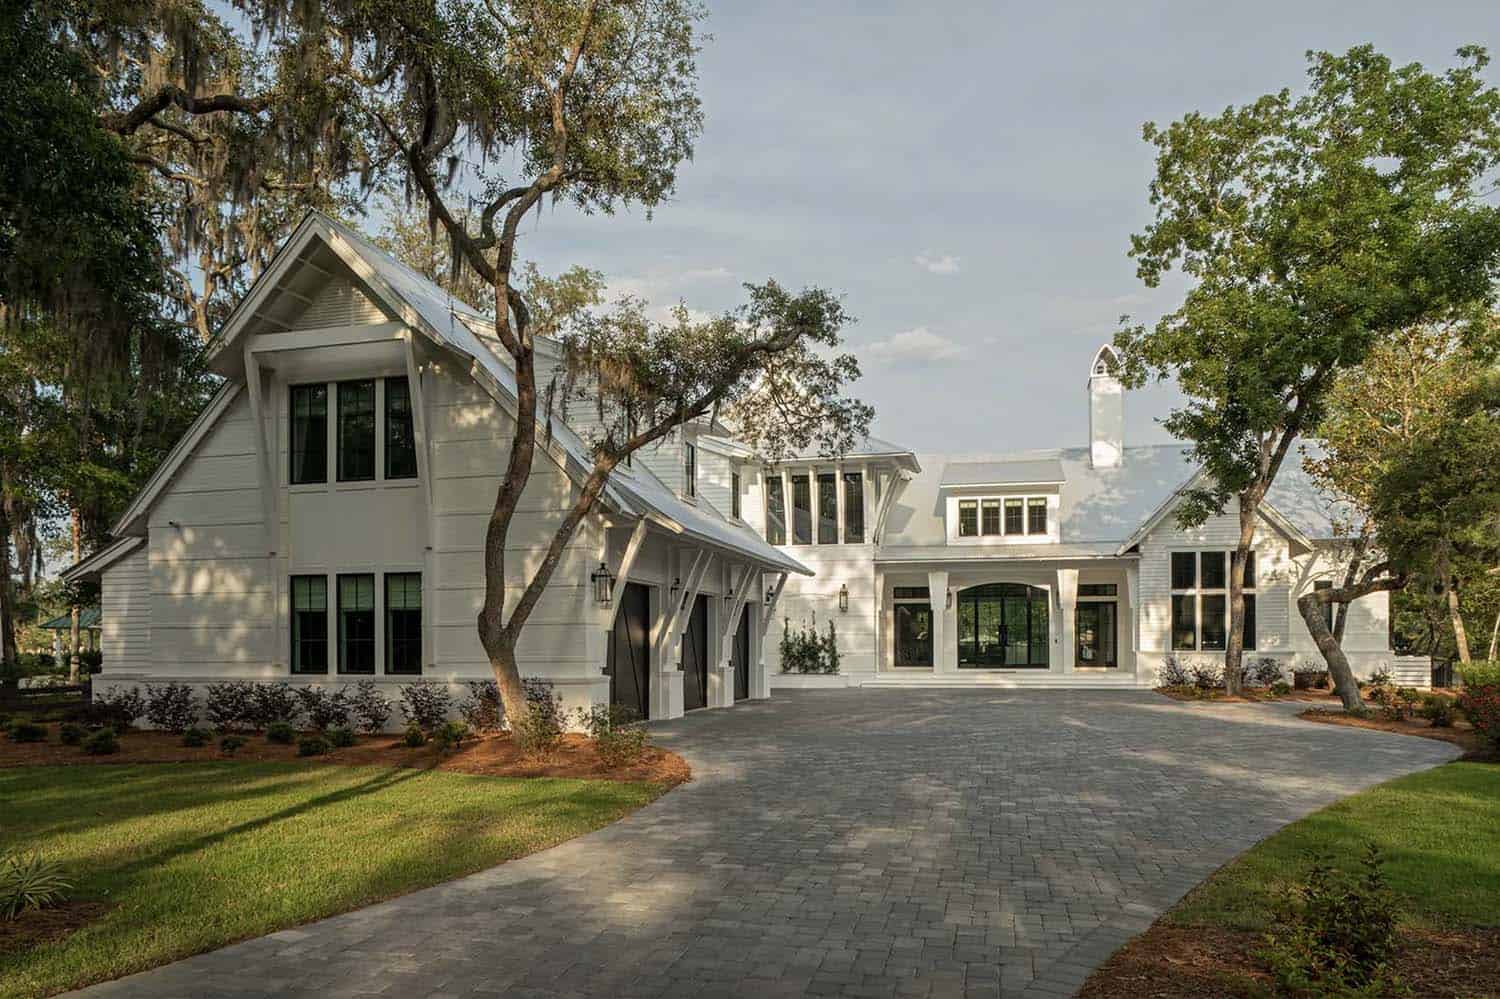 See this stunning Florida bayfront house with inviting living spaces